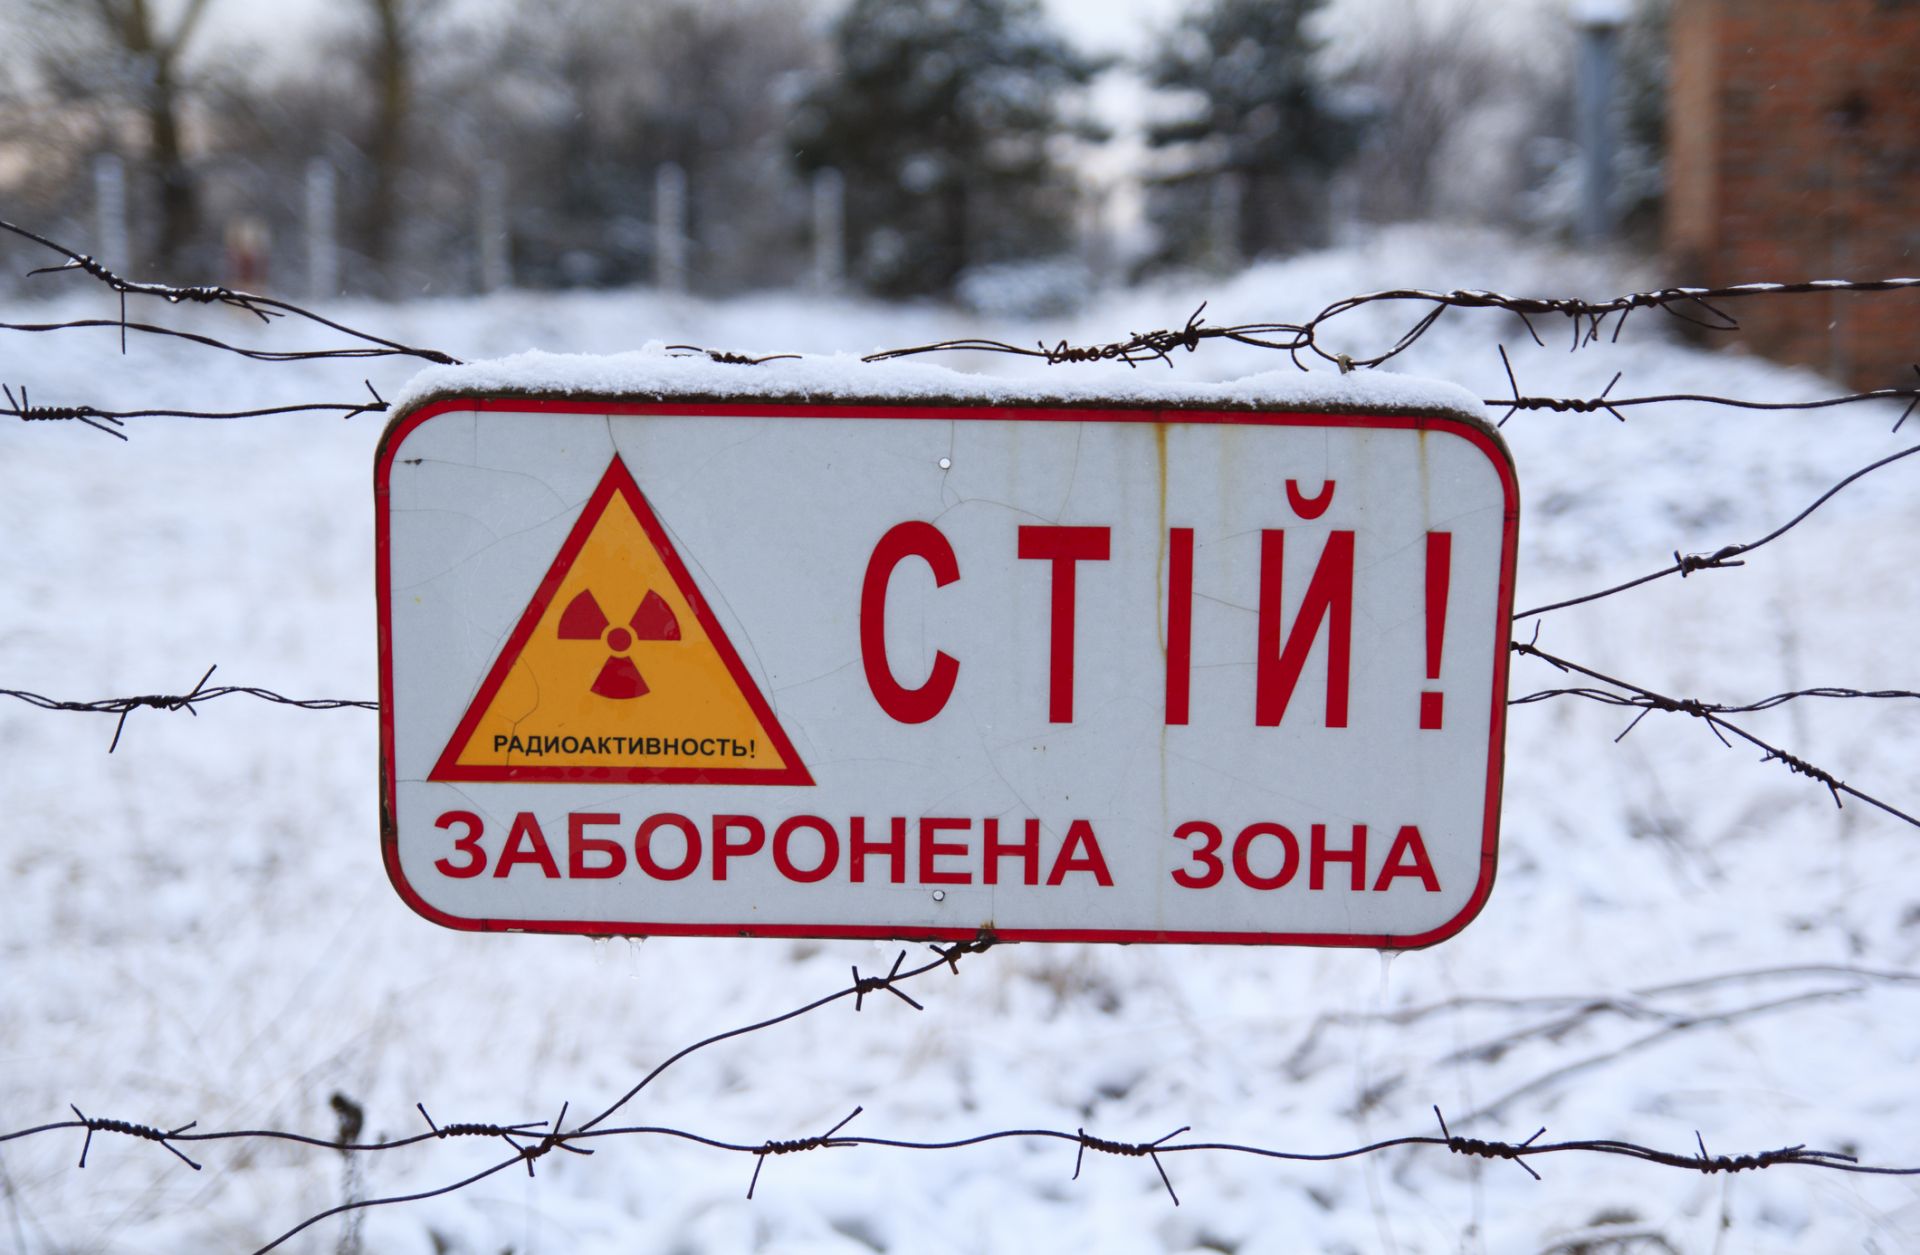 Despite the Chernobyl nuclear plant accident of 1986, Russia has become the dominant player in the nuclear power export game.